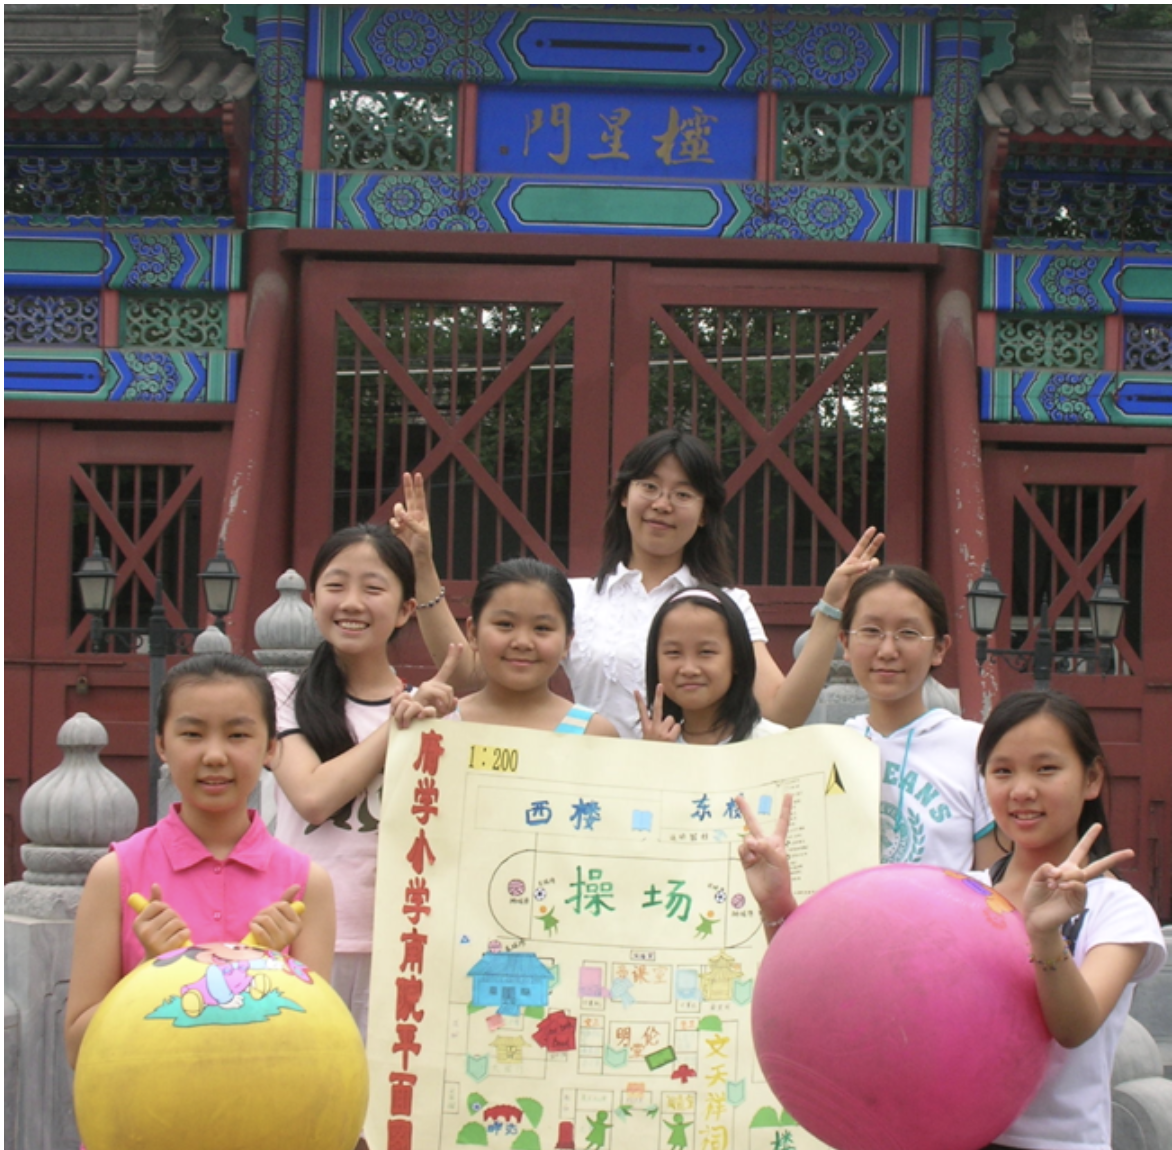 Youth Green Mapmakers in Beijing